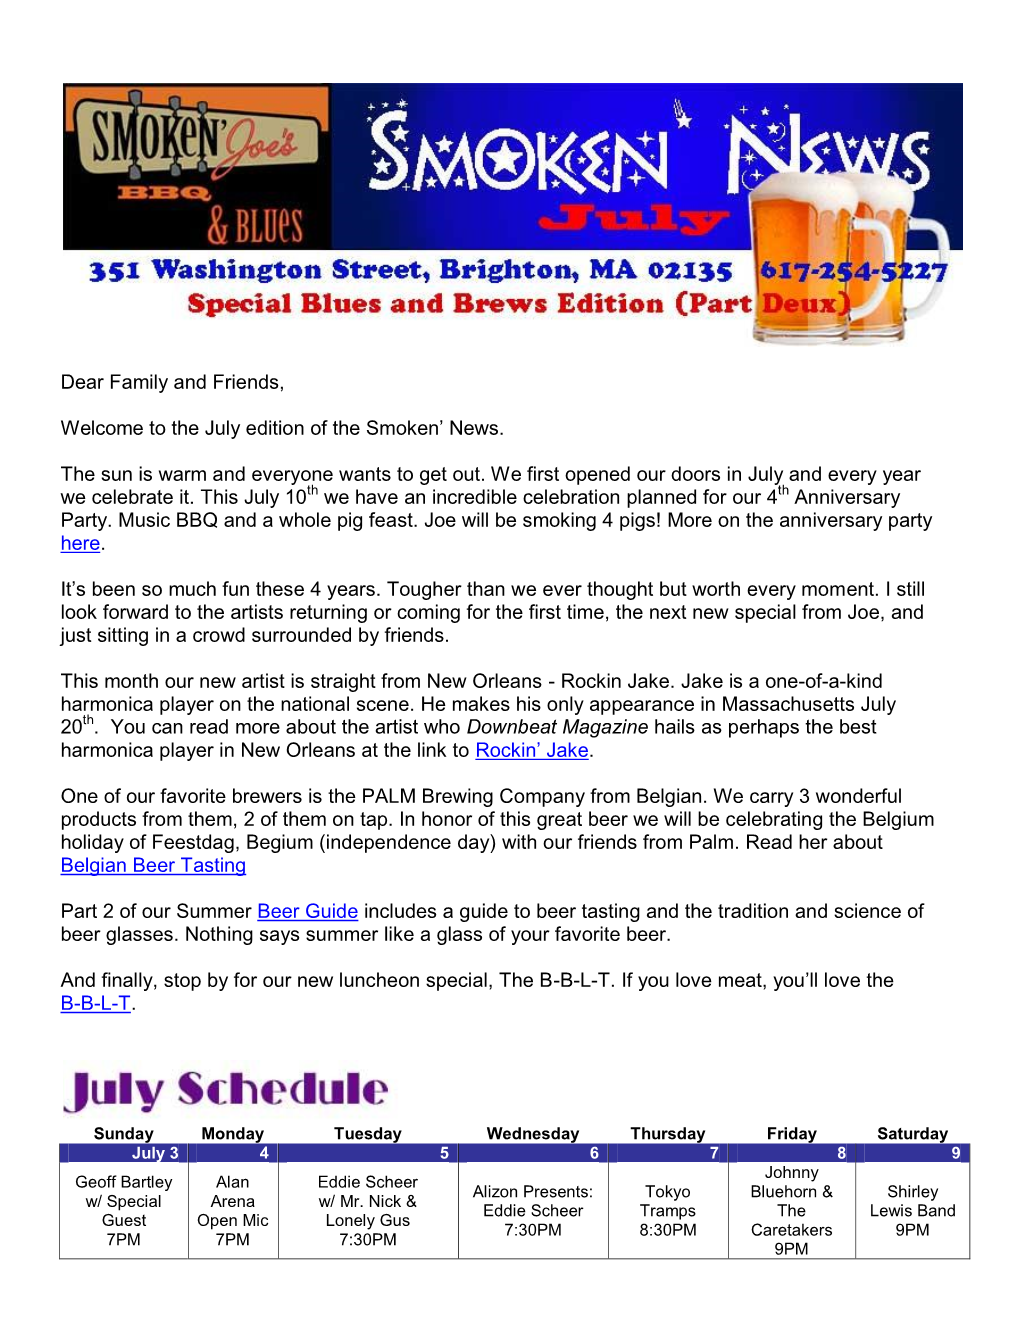 Dear Family and Friends, Welcome to the July Edition of the Smoken‟ News. the Sun Is Warm and Everyone Wants to Get Out. We